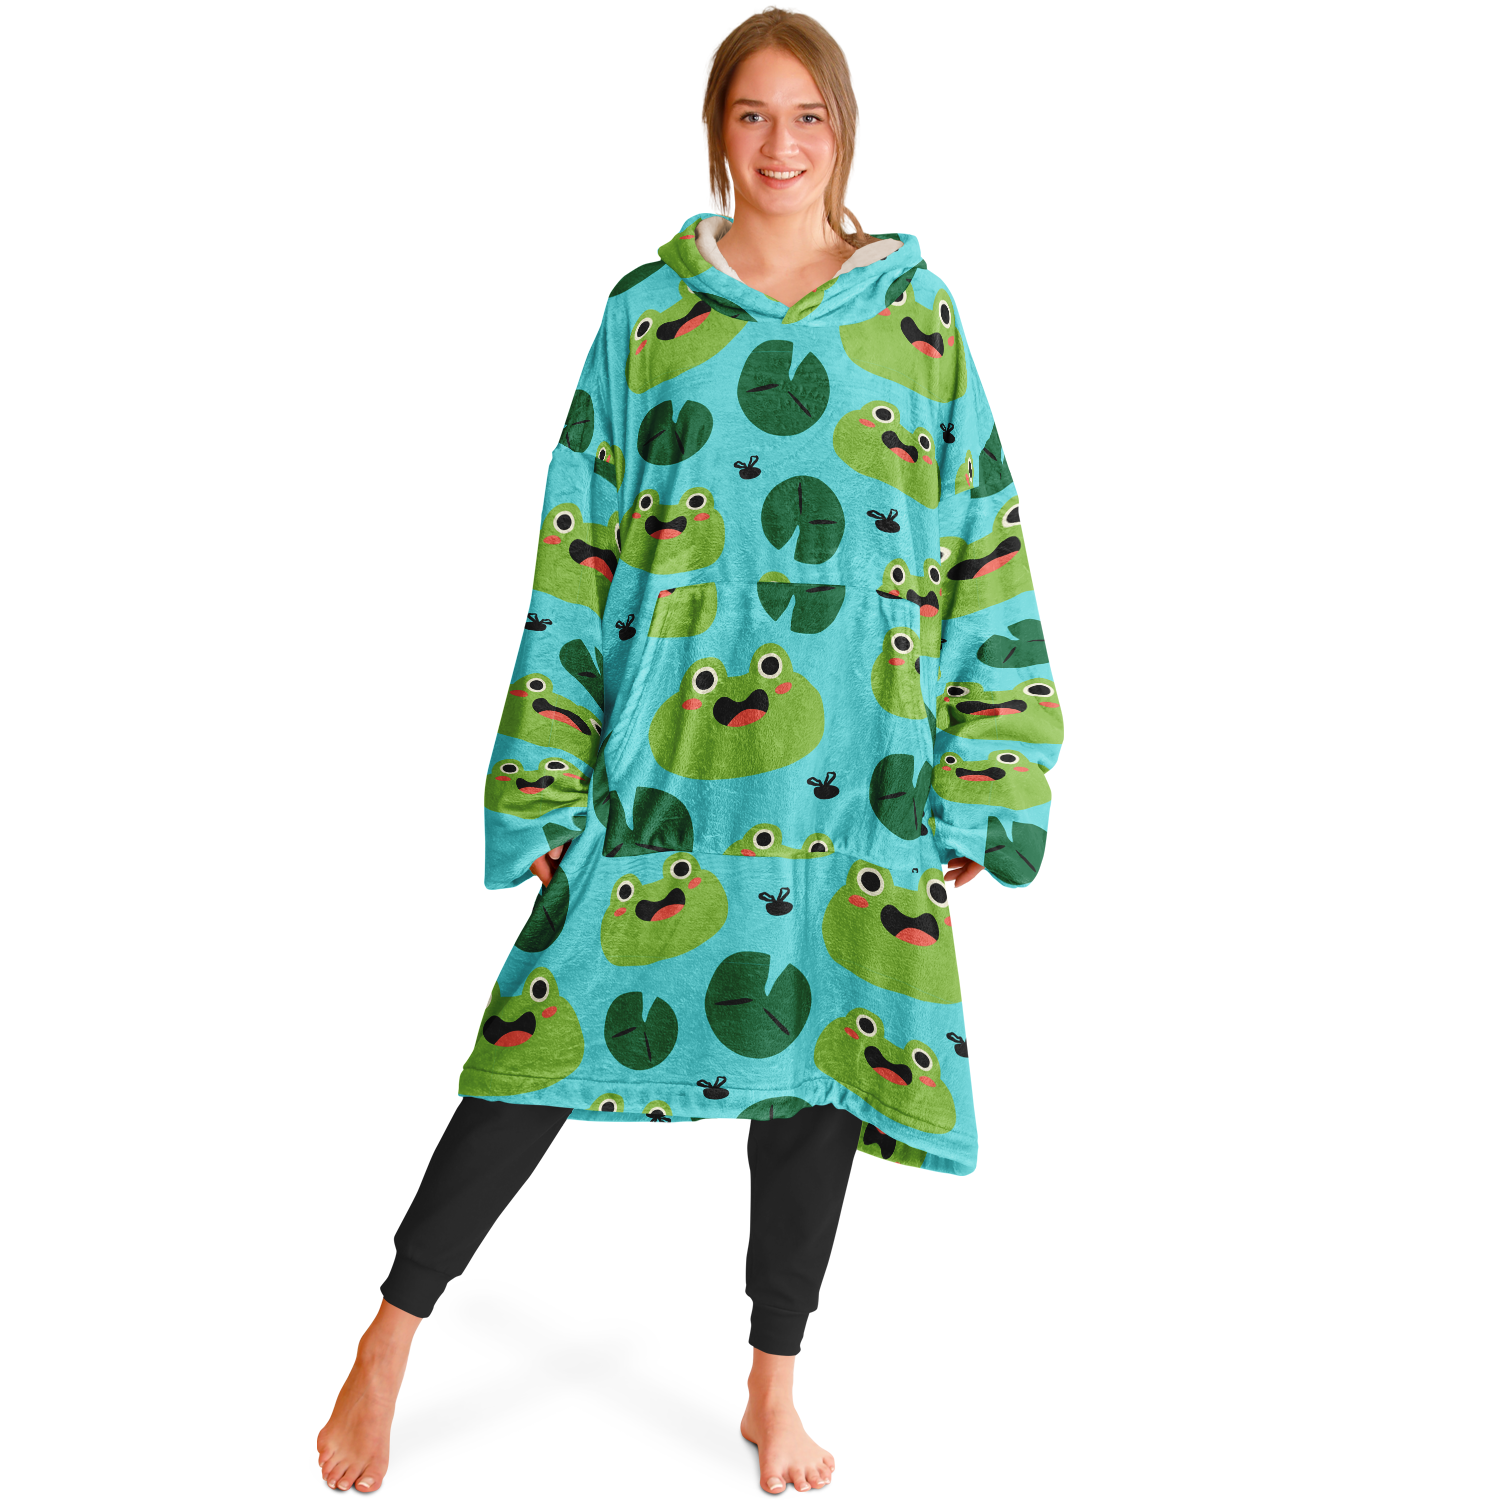 Froggy Style Rest-Day Hoodie - Arcadia Apparel